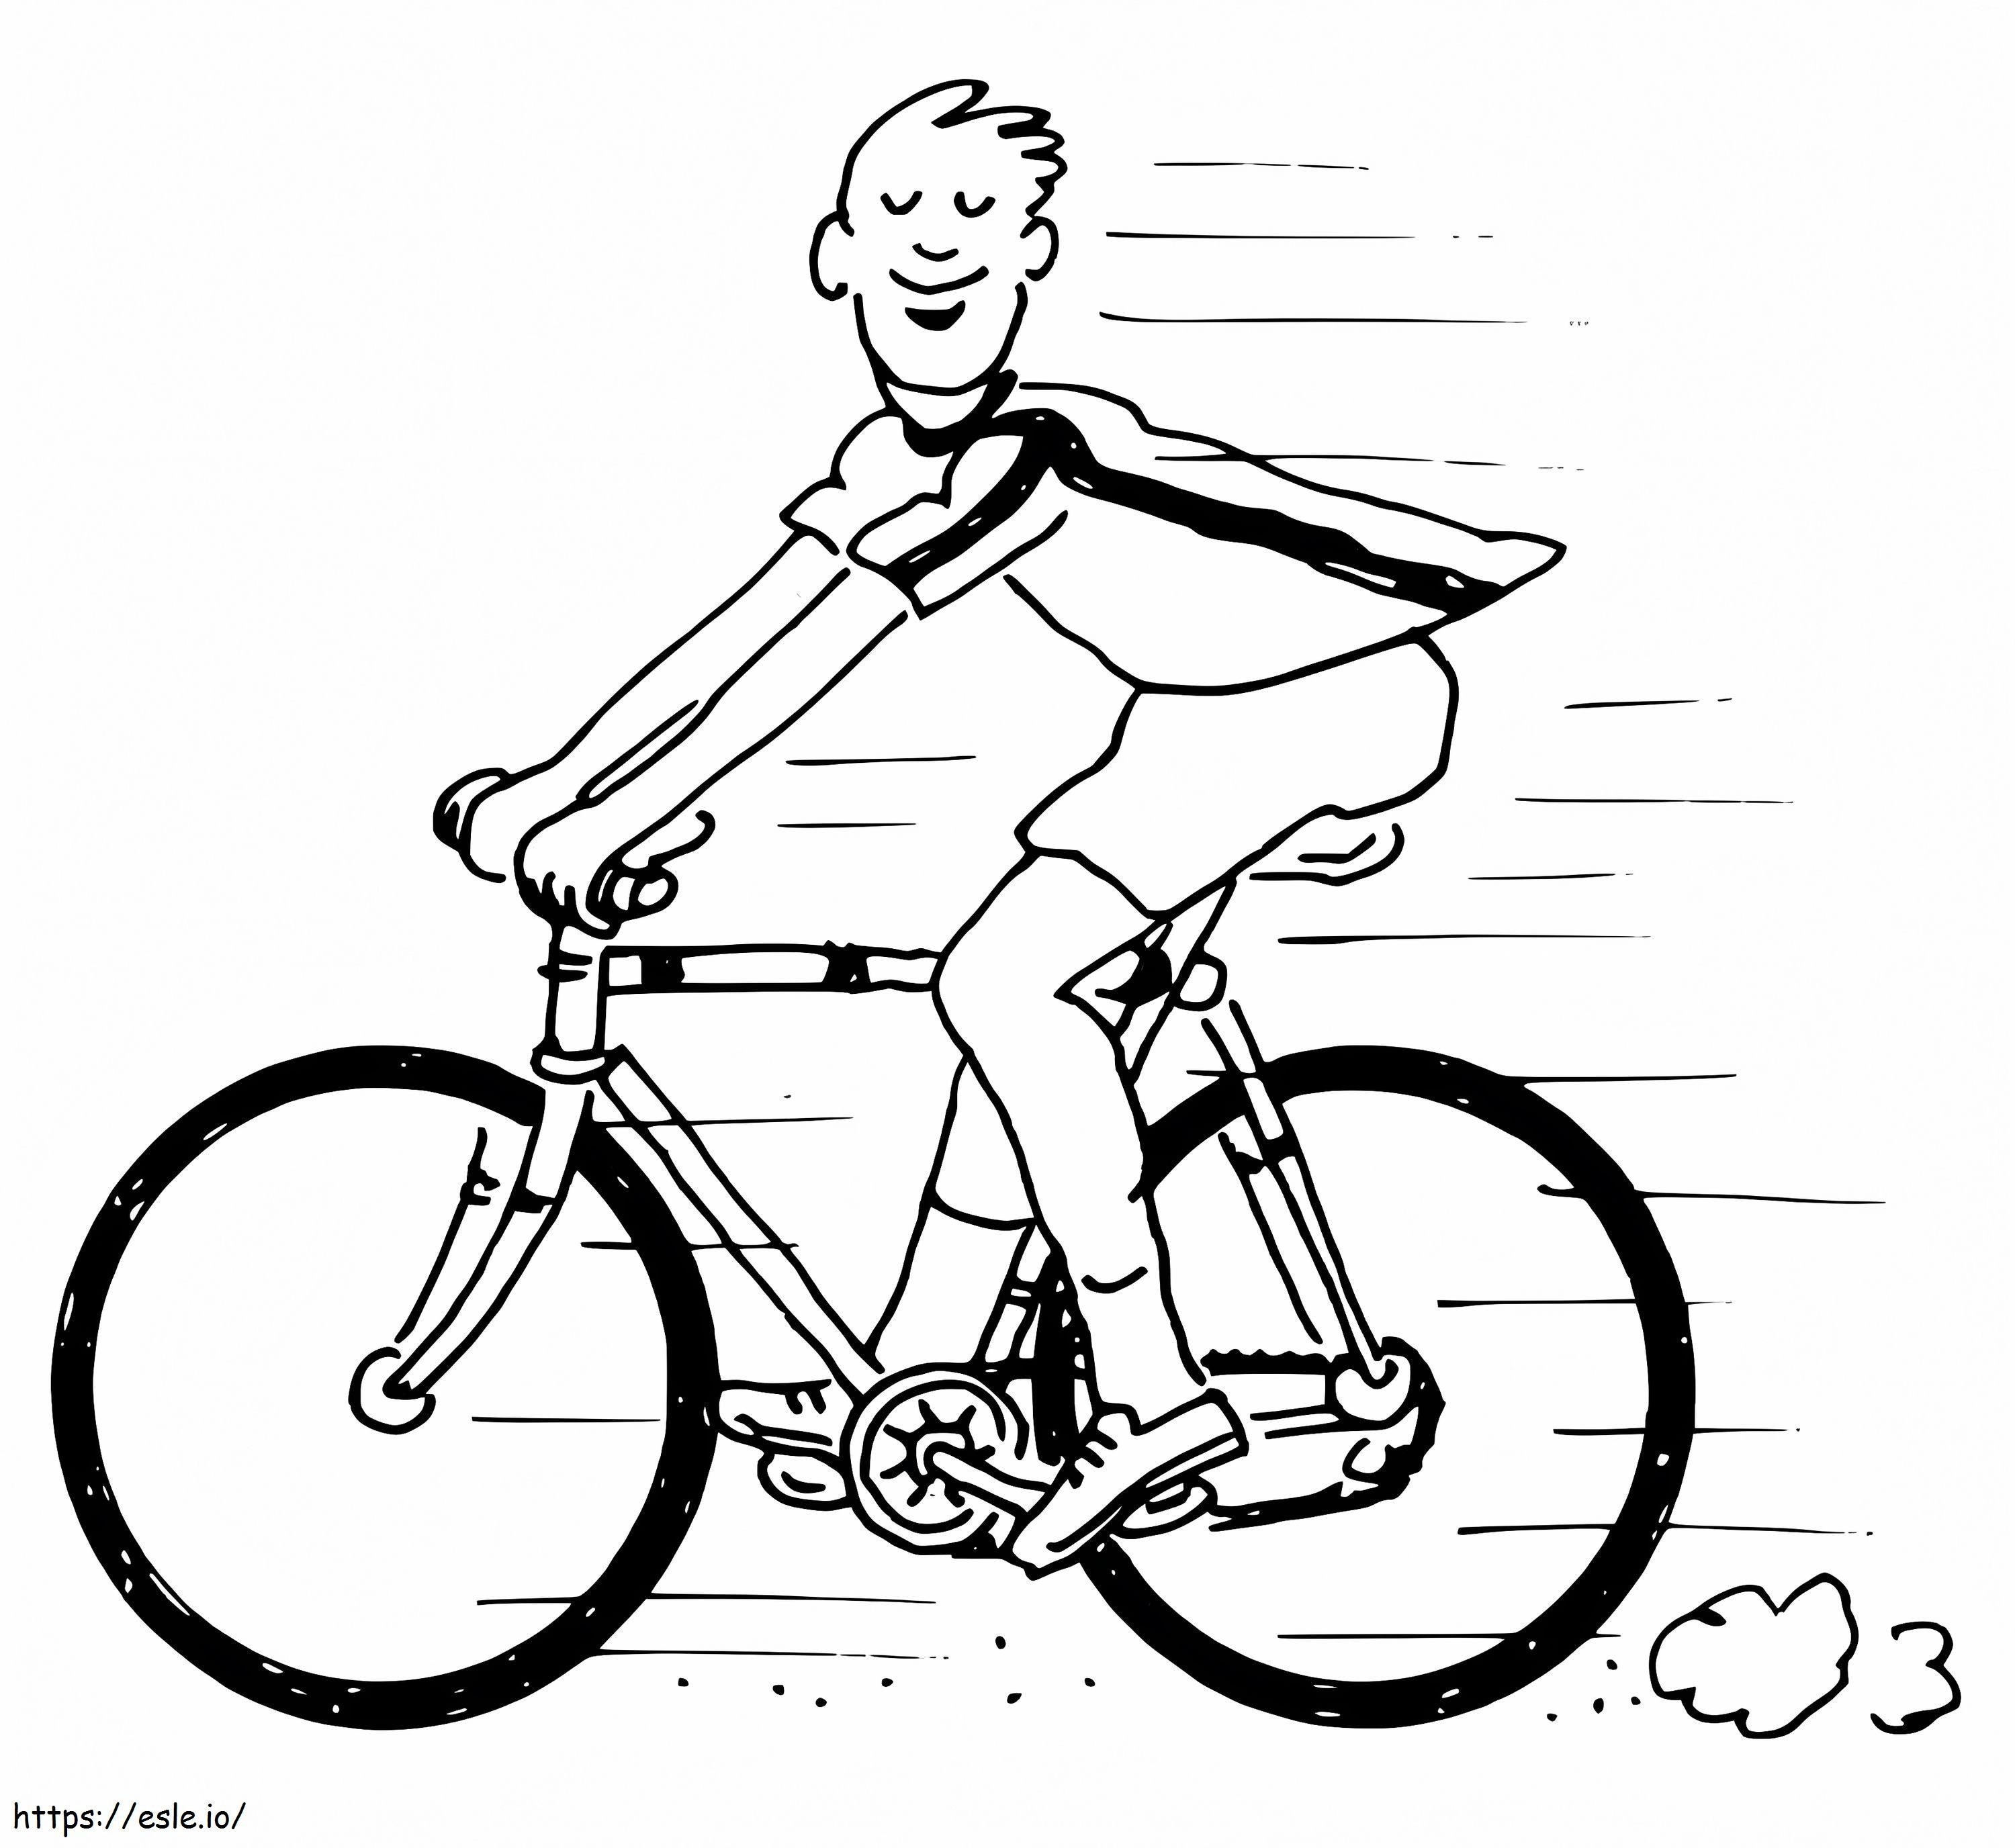 Bike Riding coloring page